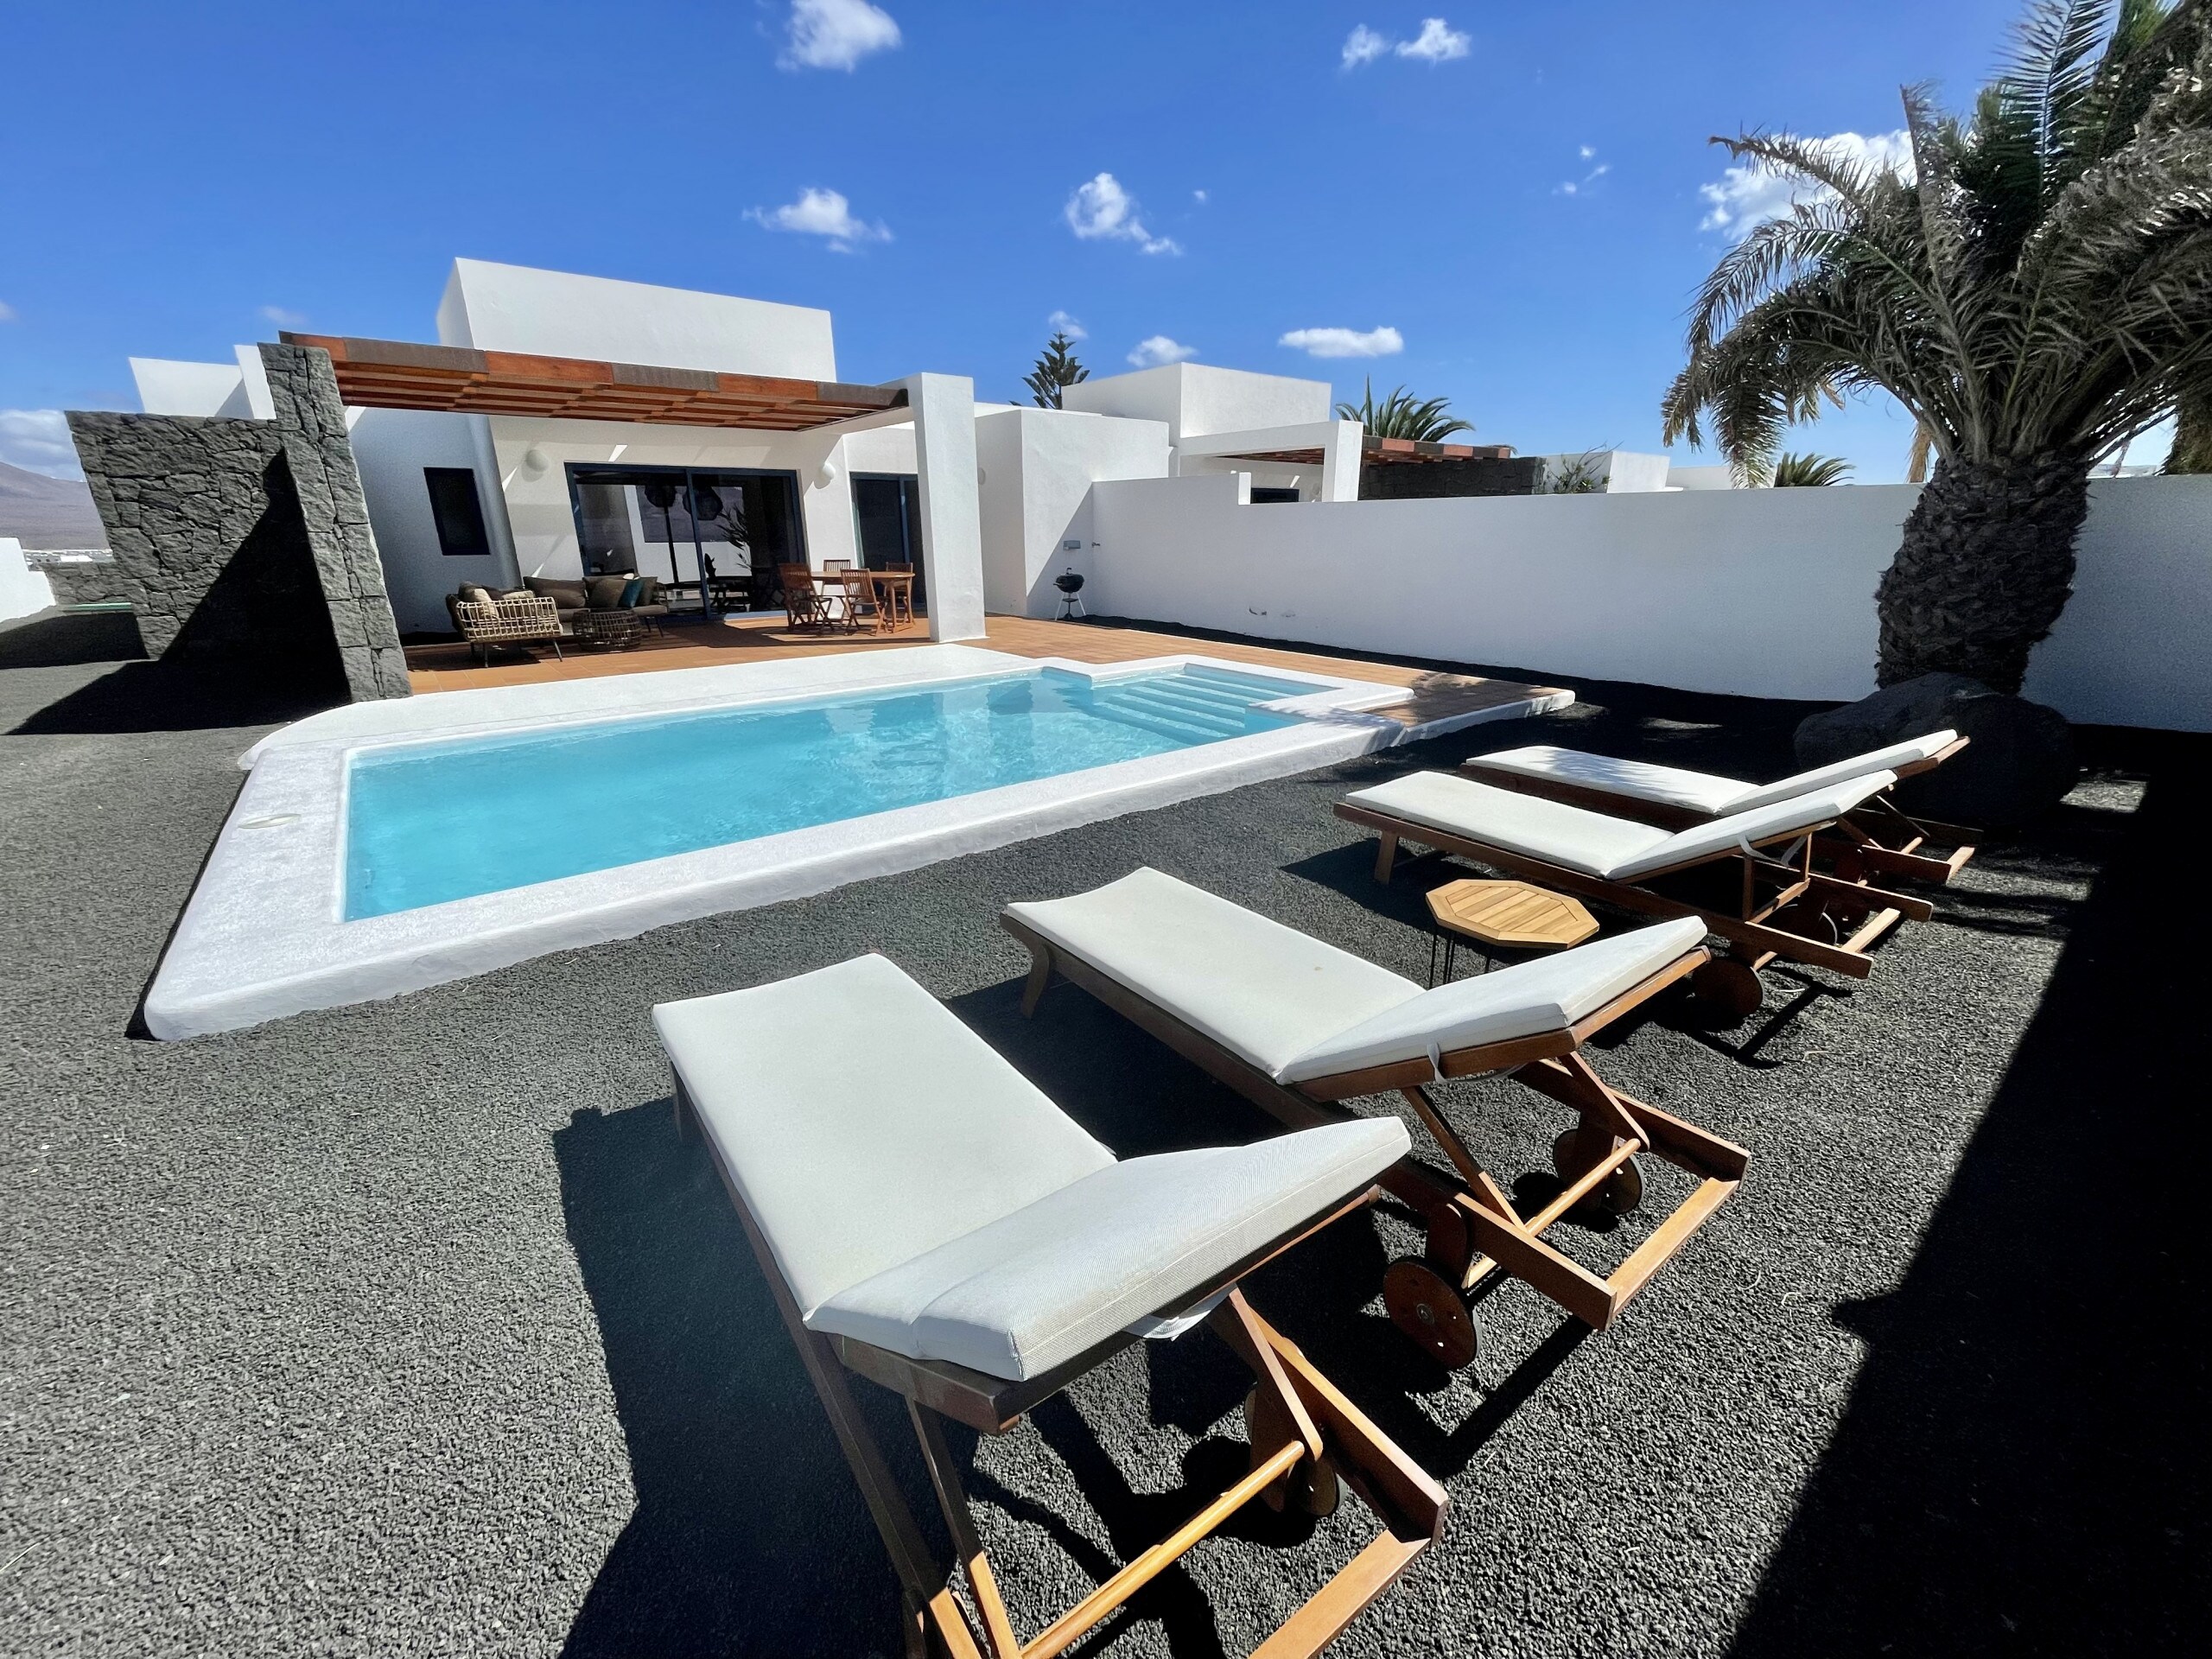 Large terrace with outdoor furniture and private pool heated by a heat pump